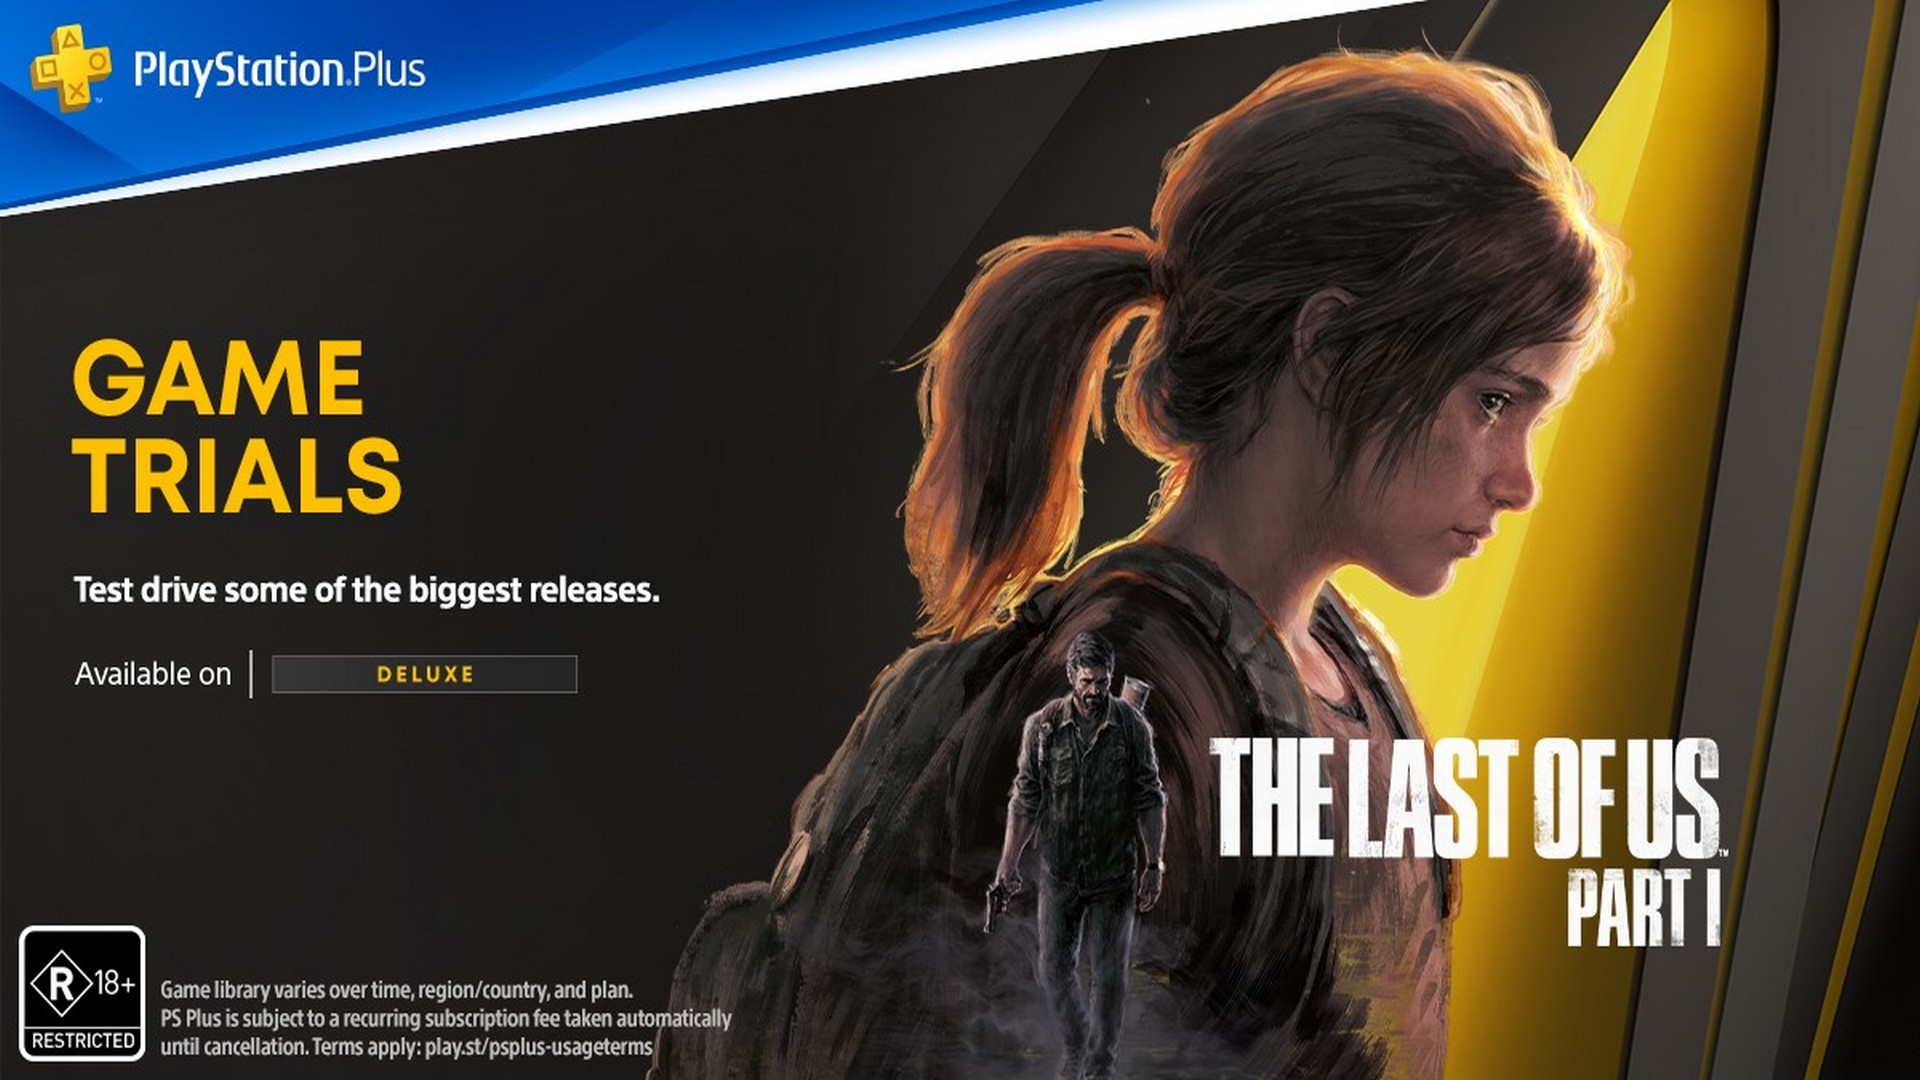 The Last Of Us Part l Being Added To Game Trials On PS Plus Deluxe